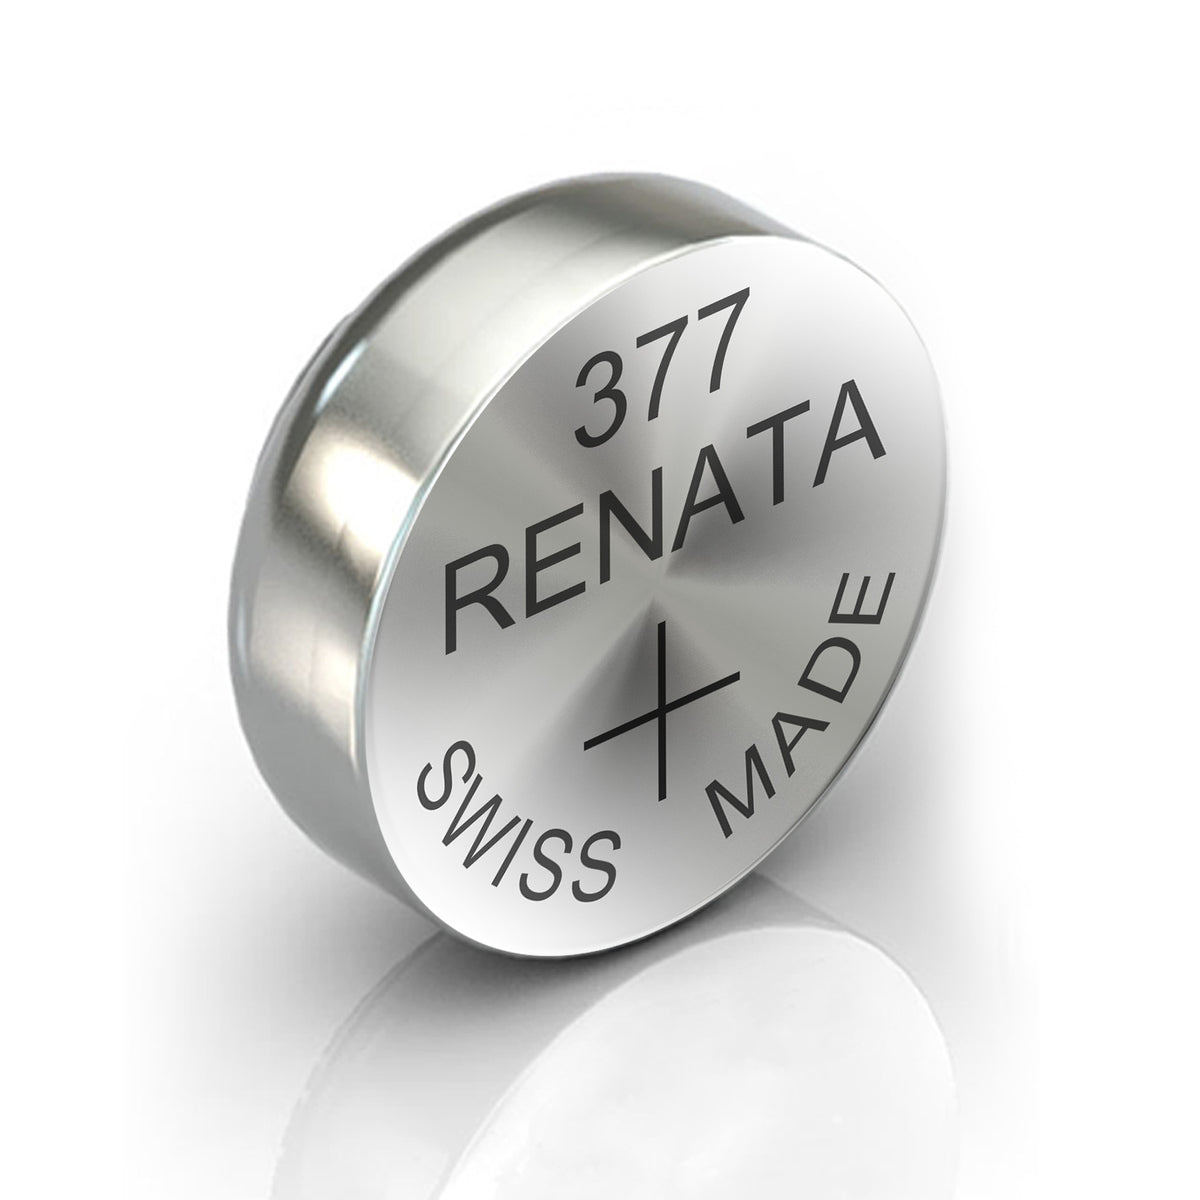 https://www.tradenrg.shop/wp-content/uploads/1692/08/8x-renata-377-watch-battery-silver-oxide-coin-cell-v377-1-55v-sr626sw-renata-well-assist-you-in-finding-the-ideal-solution-for-your-needs_0.jpg